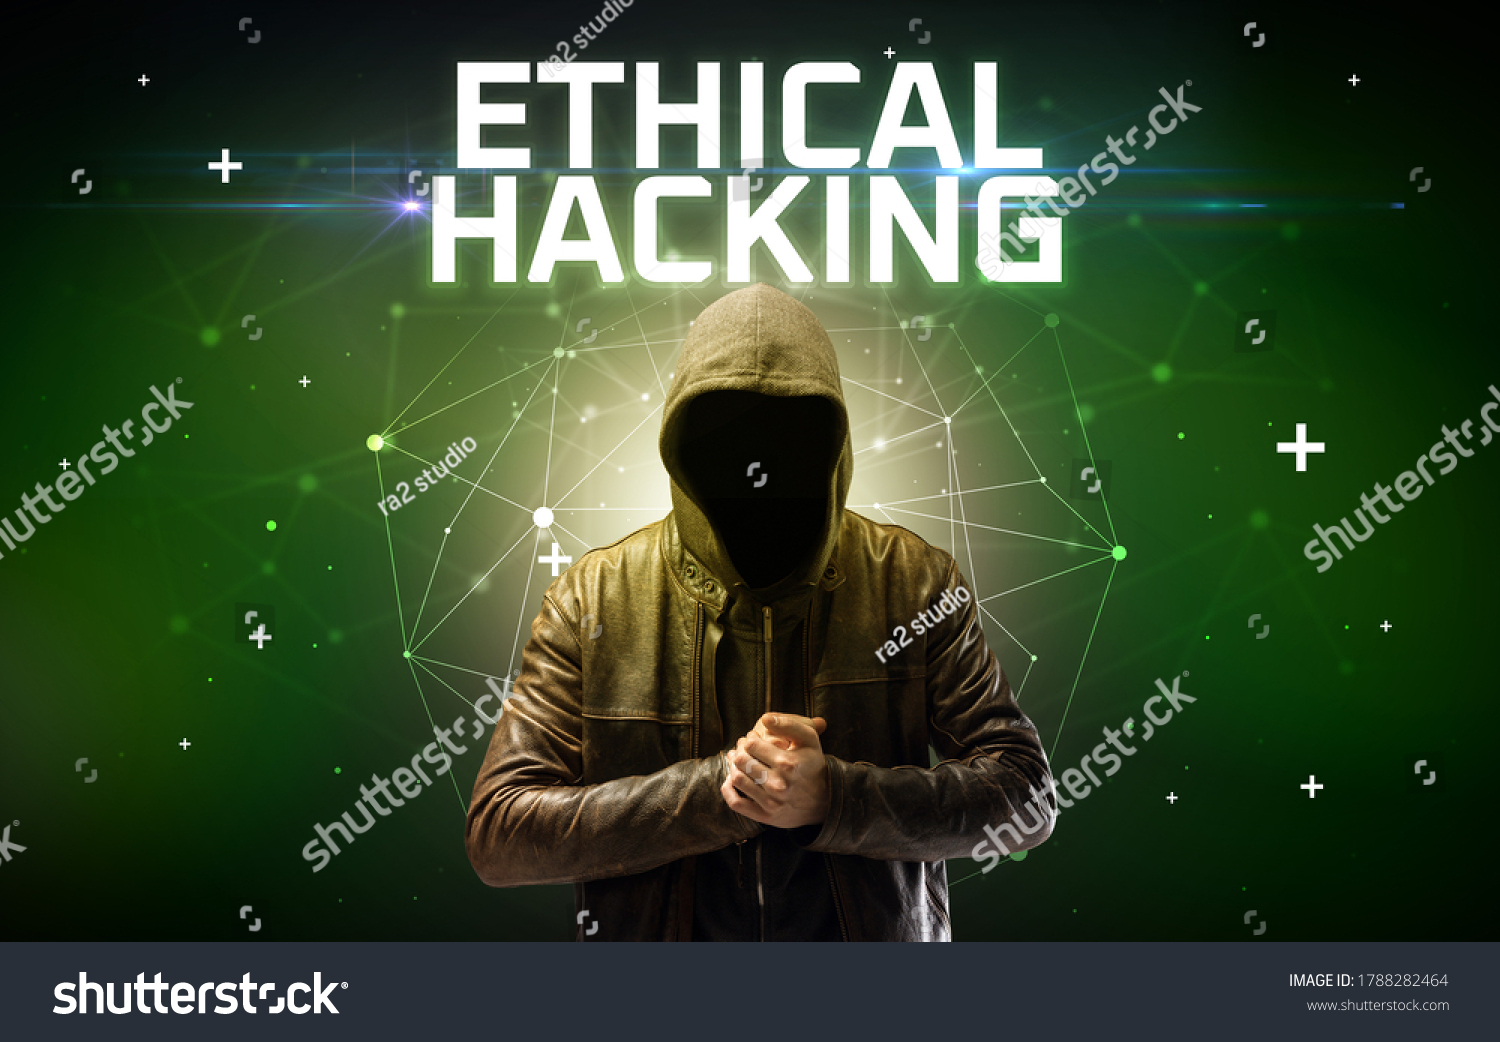 PowerPoint Template ethical hacker mysteriouswithhacking (ioppjpjlnl)